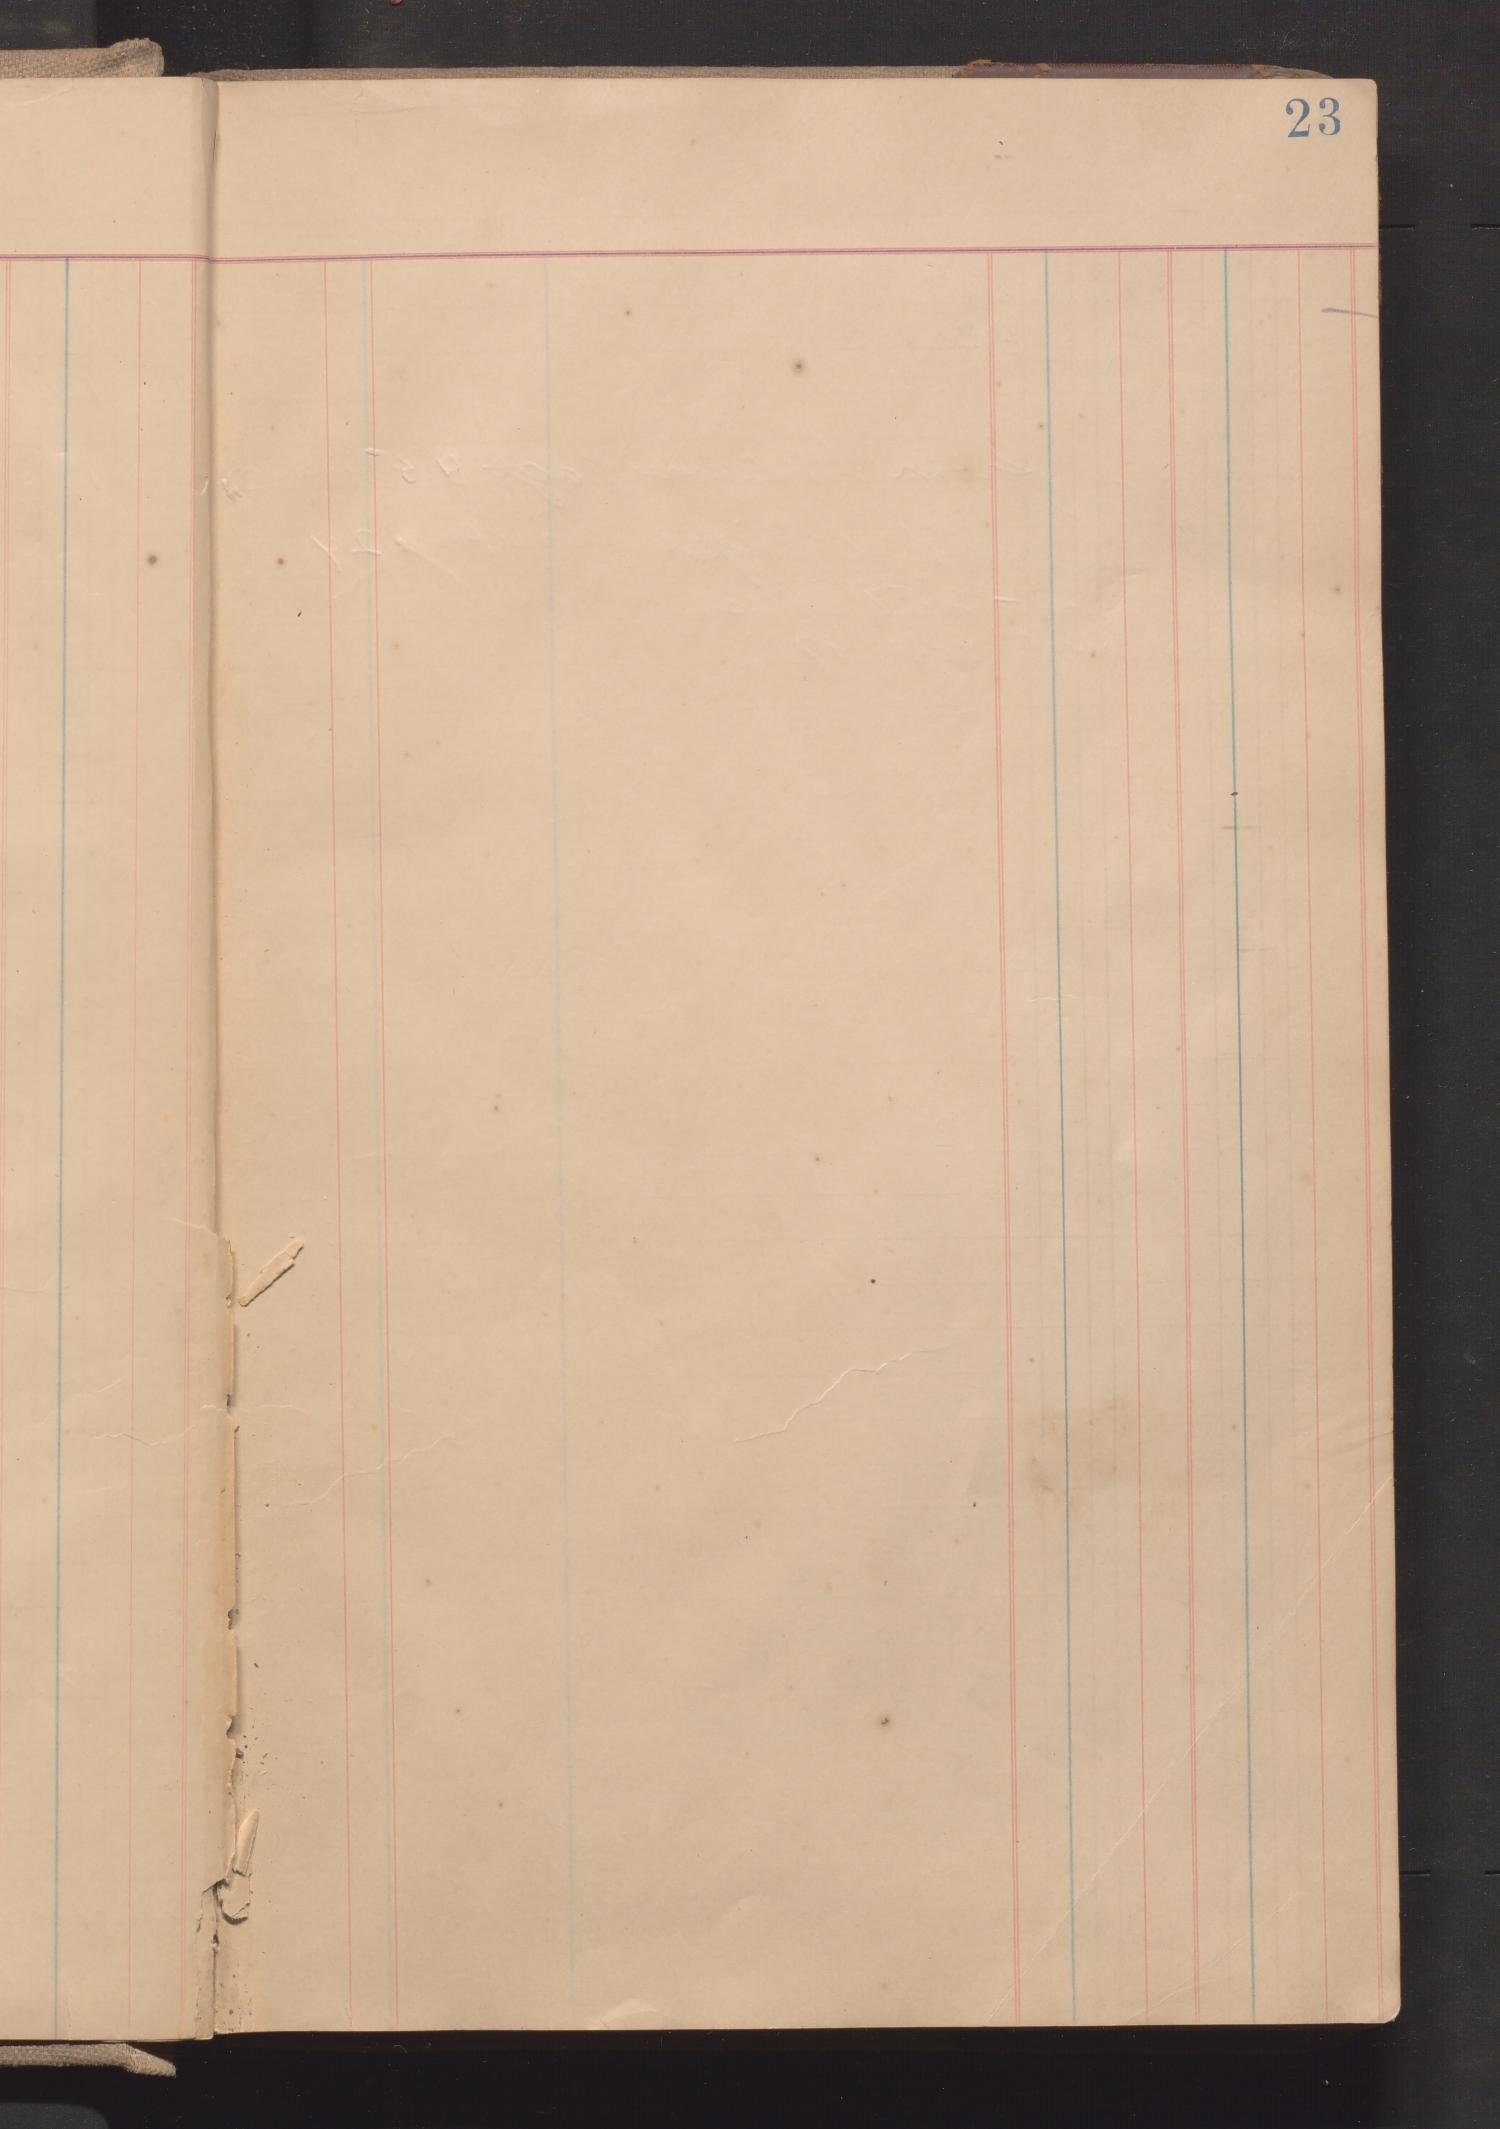 [O'Connor Brothers General Business Ledger: July 1899 - March 1939]
                                                
                                                    23
                                                